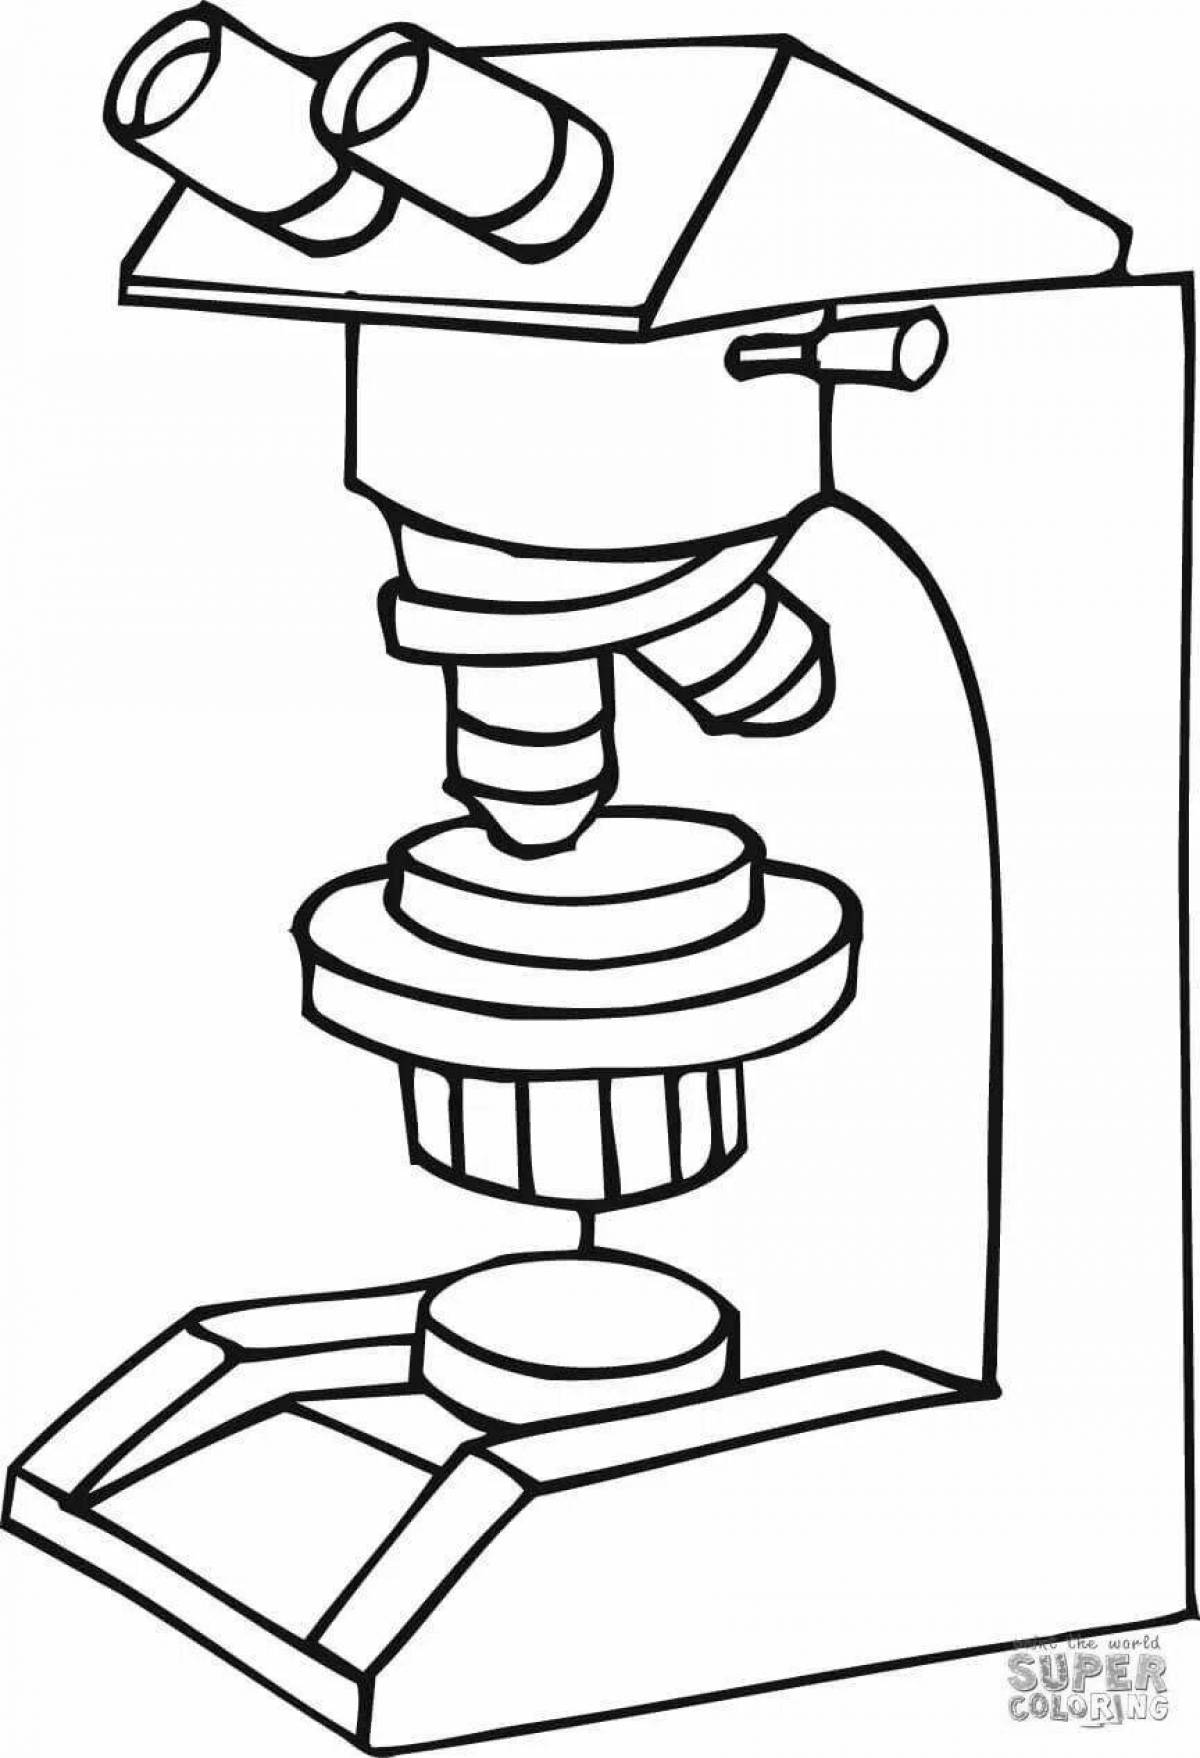 Colorful microscope coloring page for kids